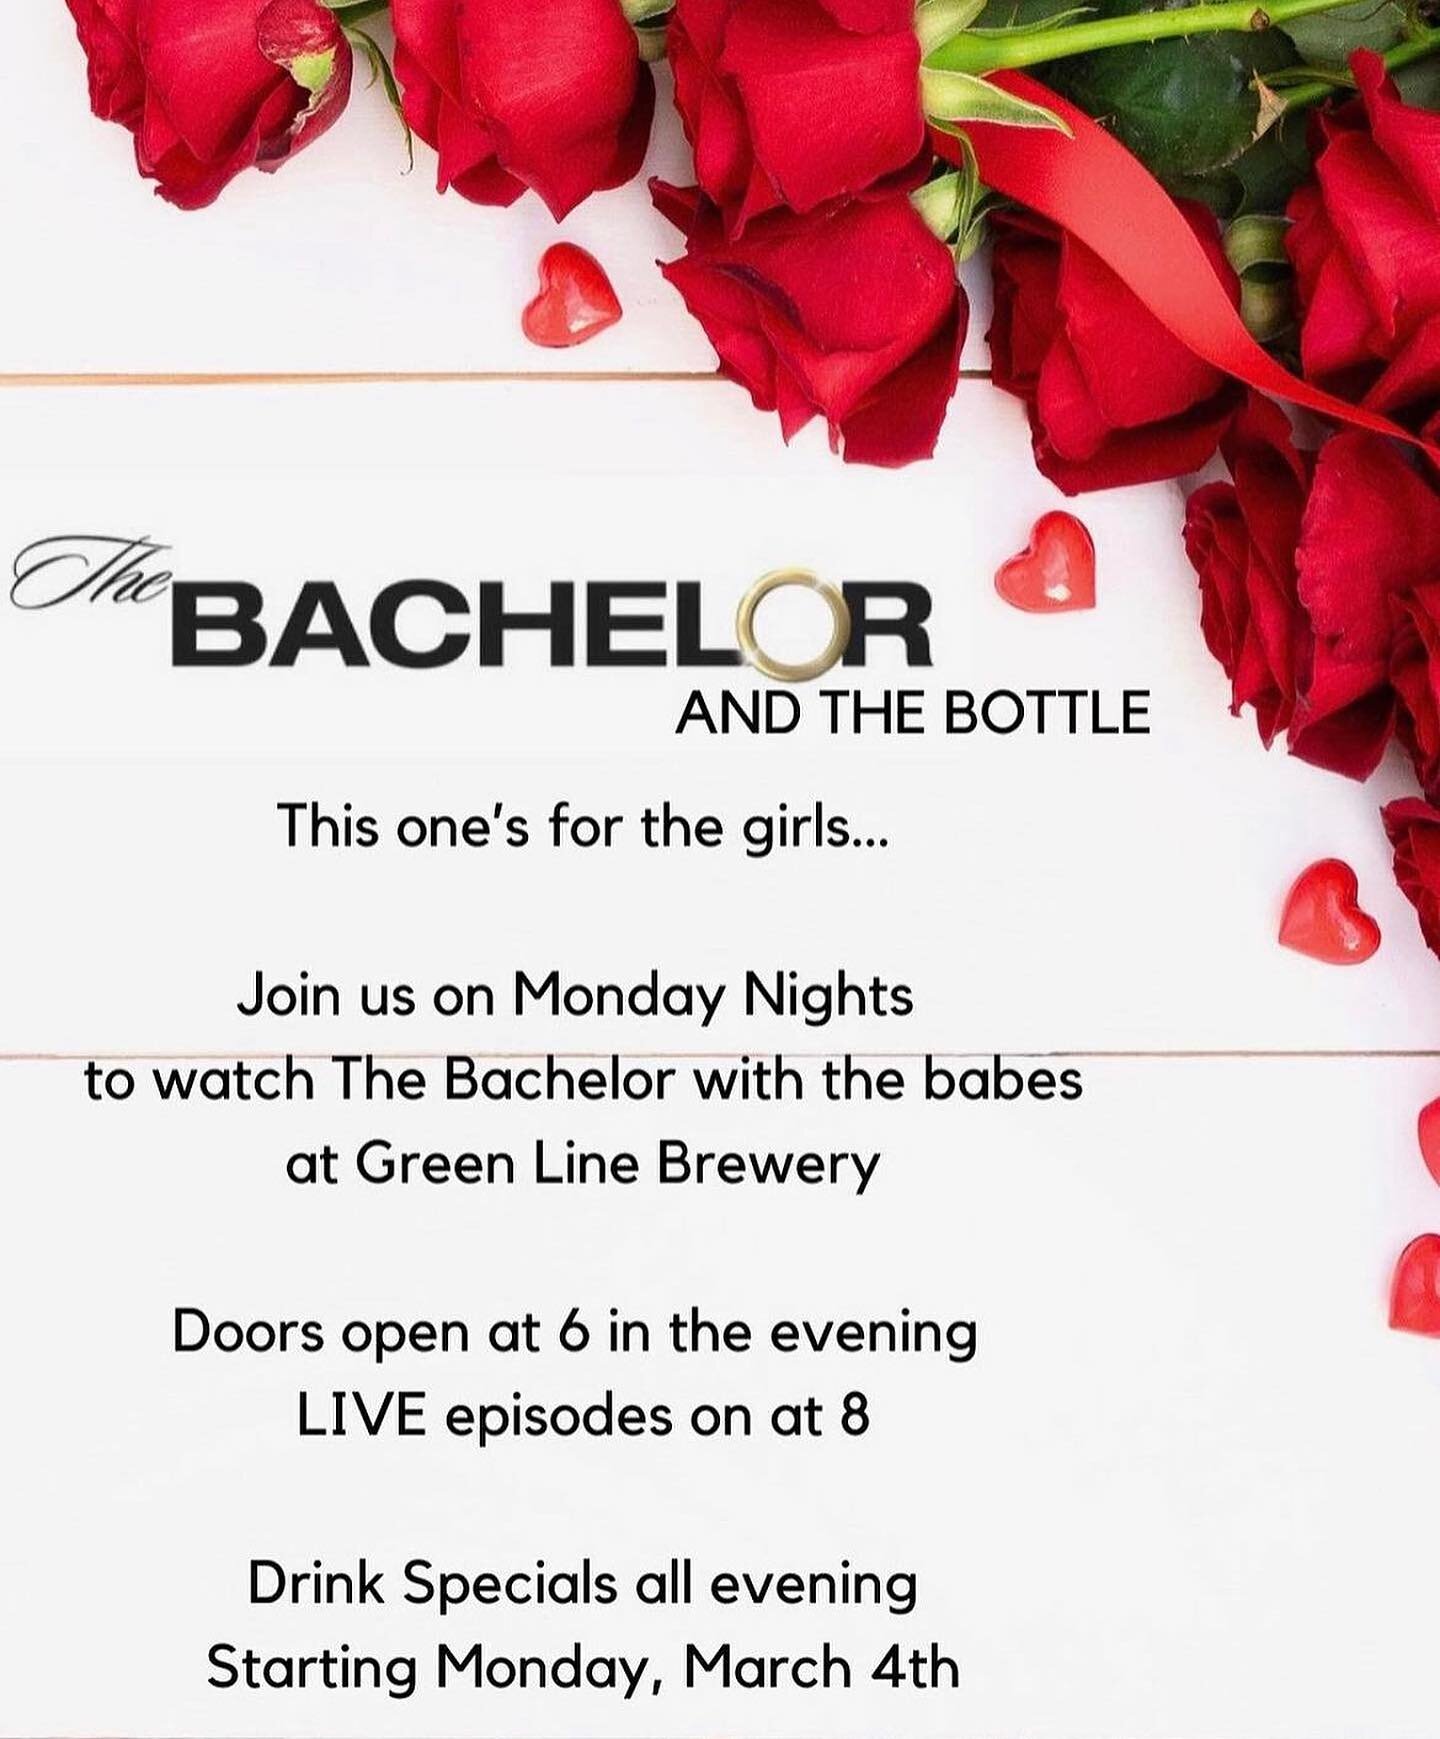 We&rsquo;re back TONIGHT! Ladies night tonight with &ldquo;The Bachelor and The Bottle&rdquo; at Green Line Brewery!🌹🥂 W&rsquo;ve got wine specials, &amp; FREE appetizers from Branchwater! Doors open at 6 and show comes on at 8! See you then🌹🥂✨ #